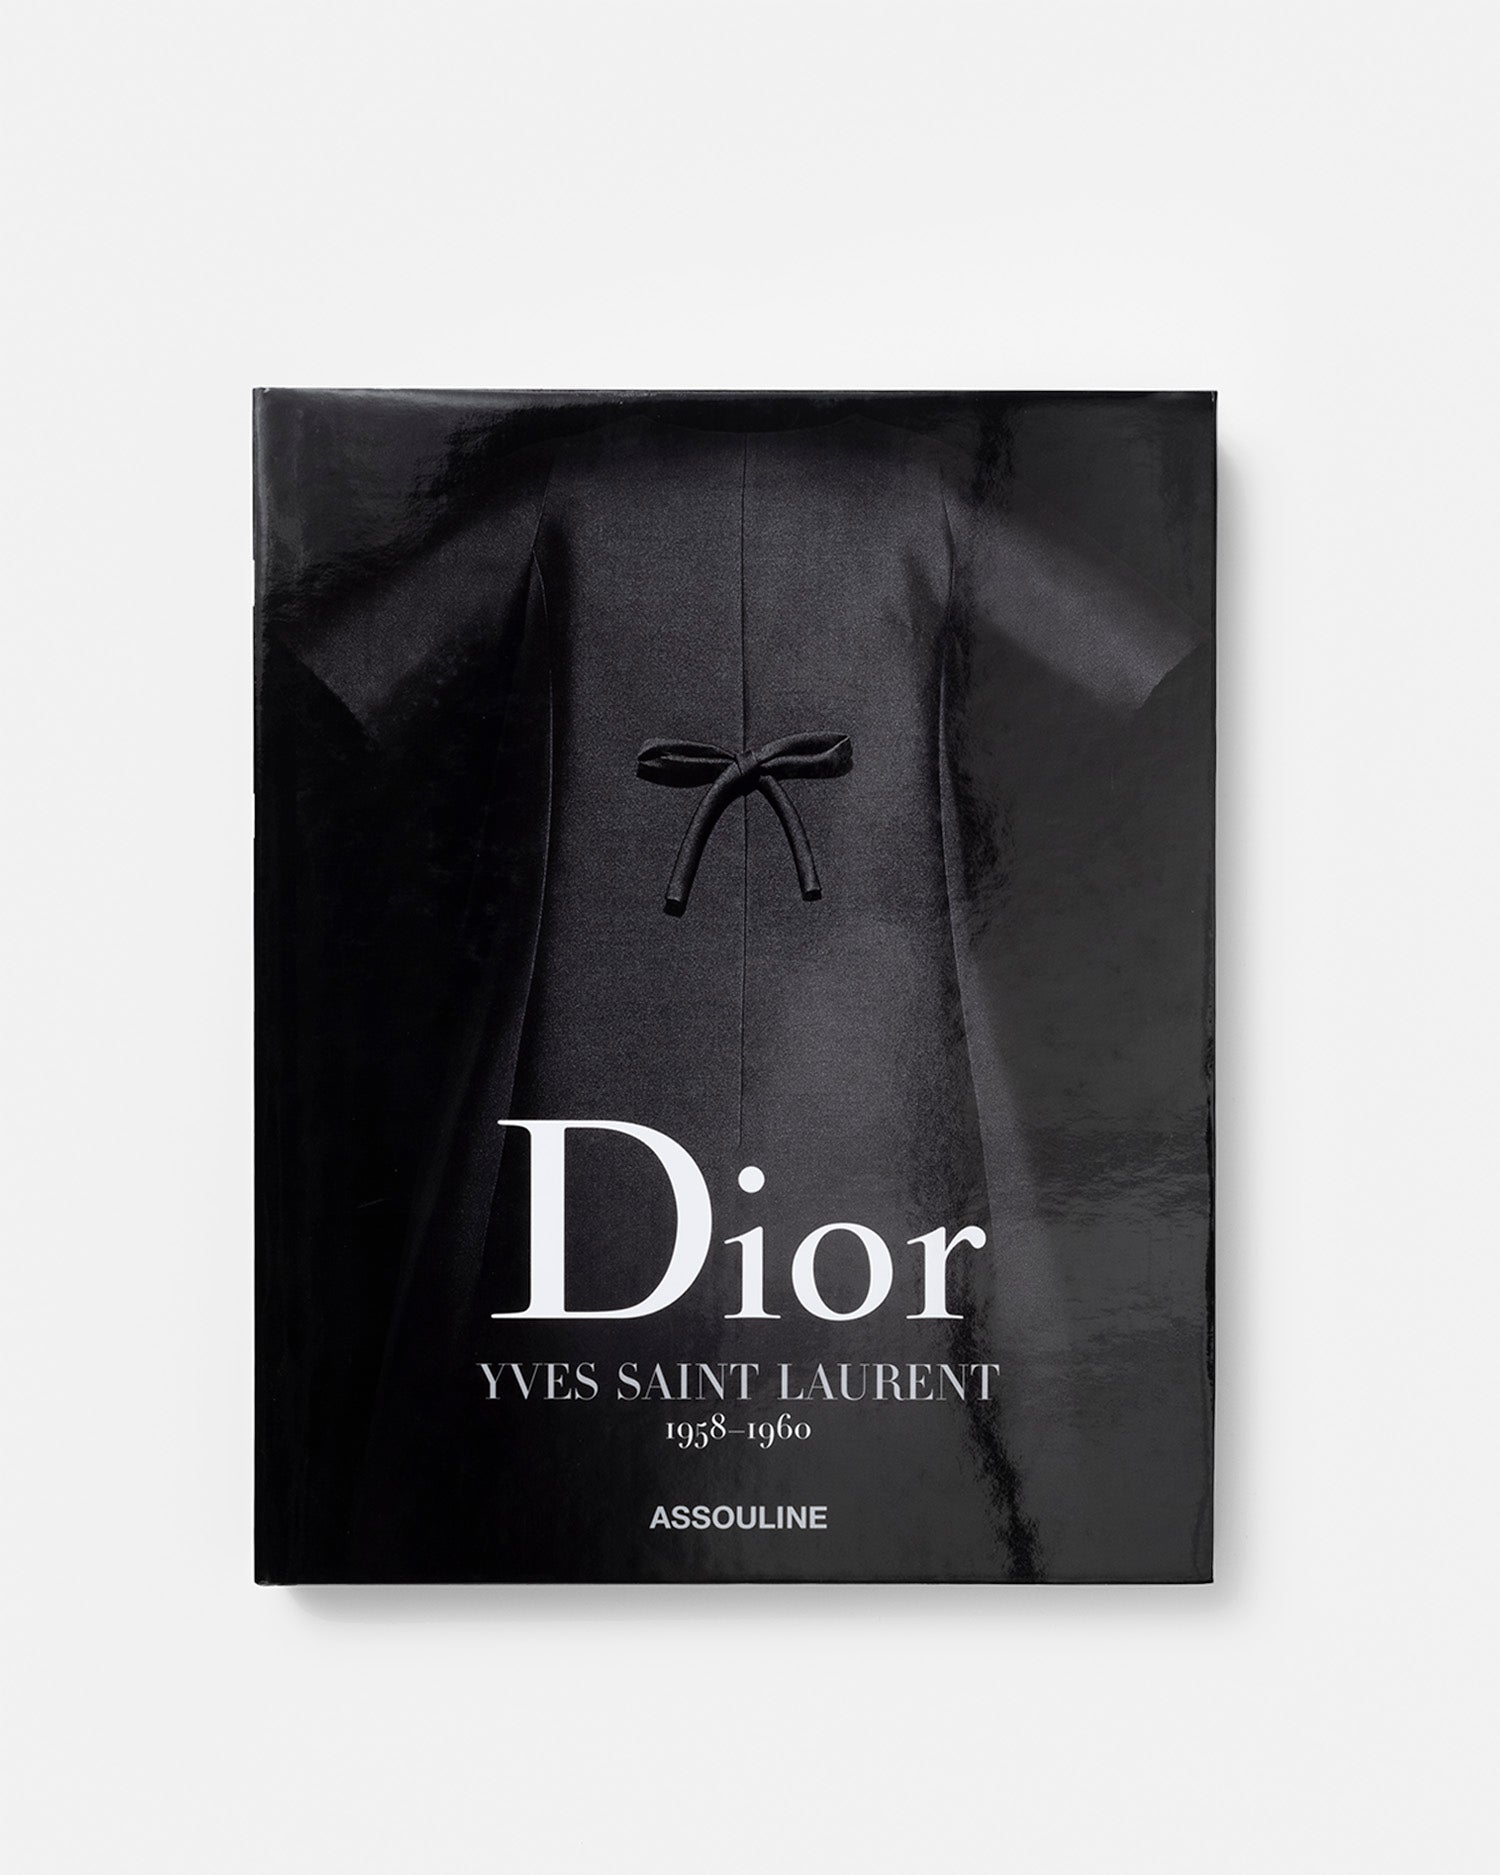 Dior by Yves Saint Laurent by Laurence Benaïm - Coffee Table Book 